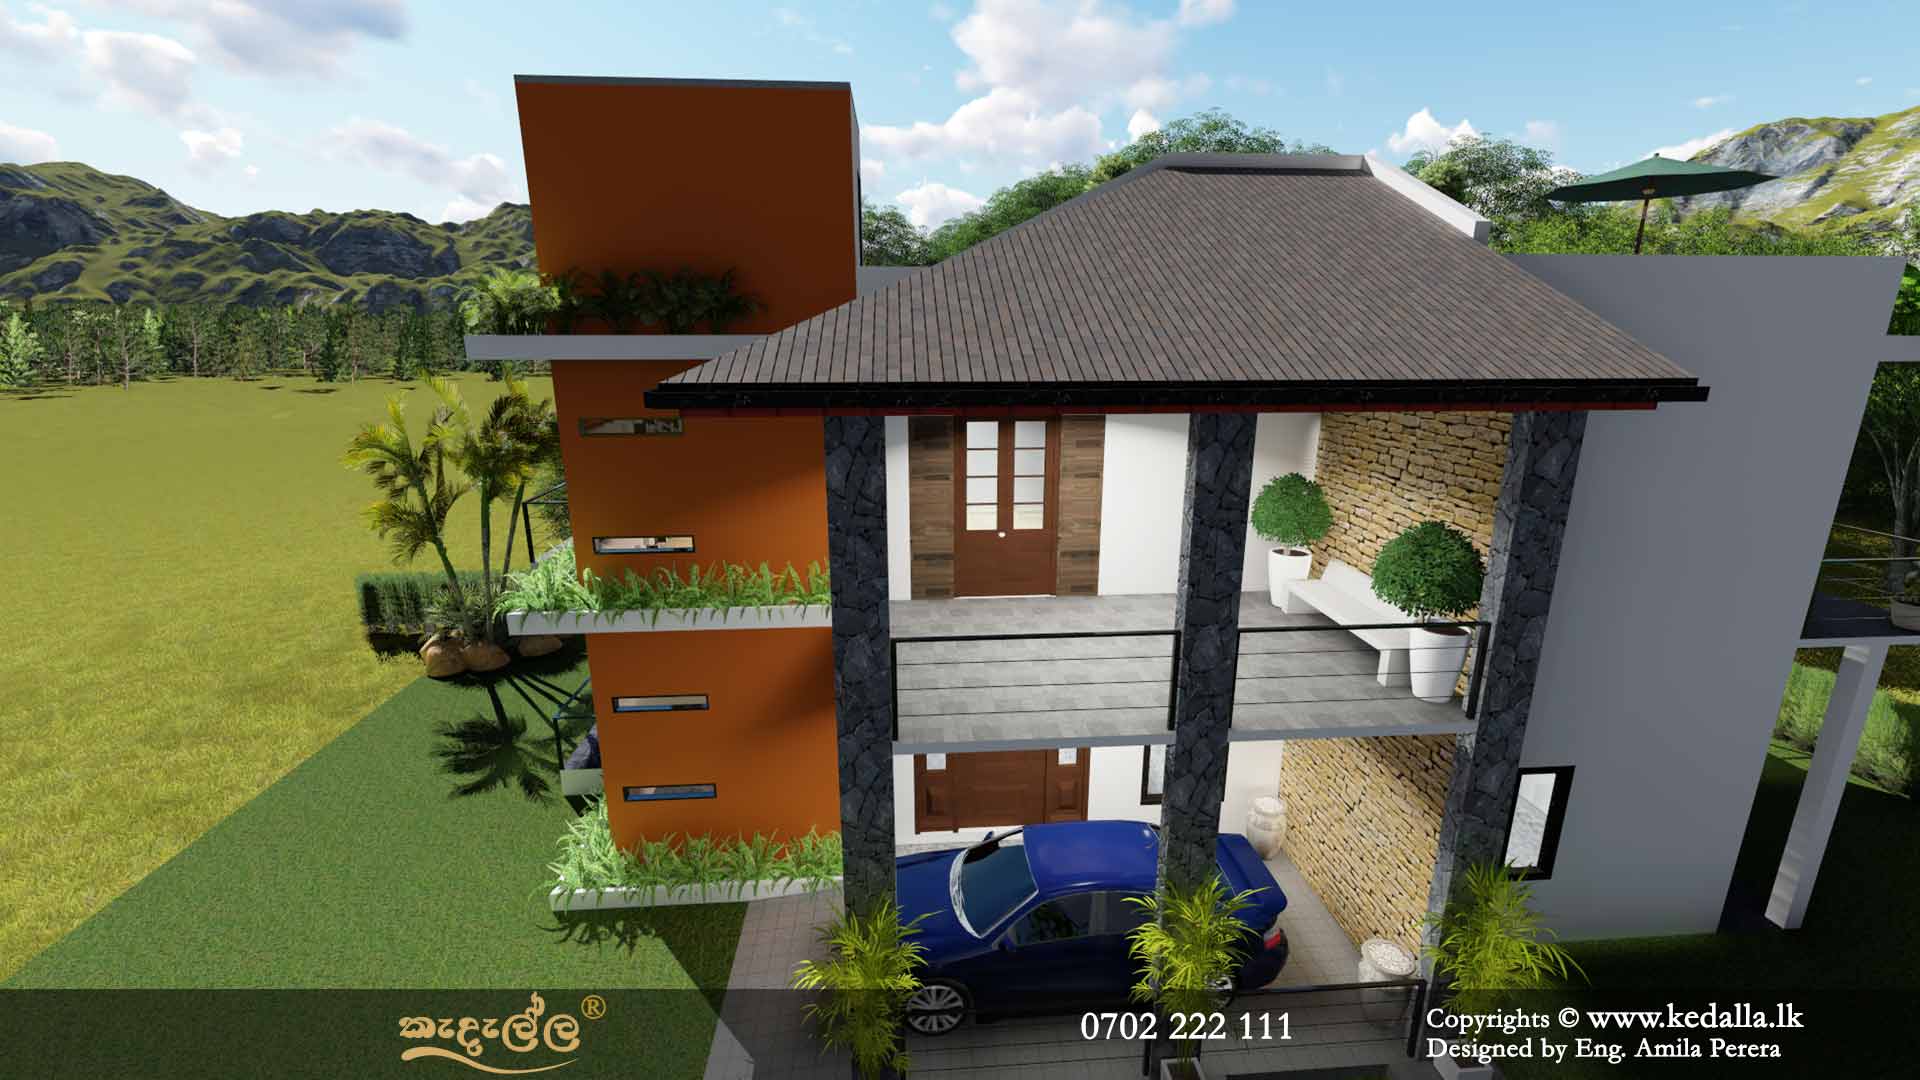 4 Bedroom Two Story House Plans in Sri Lanka - Designed by archtects in Kandy